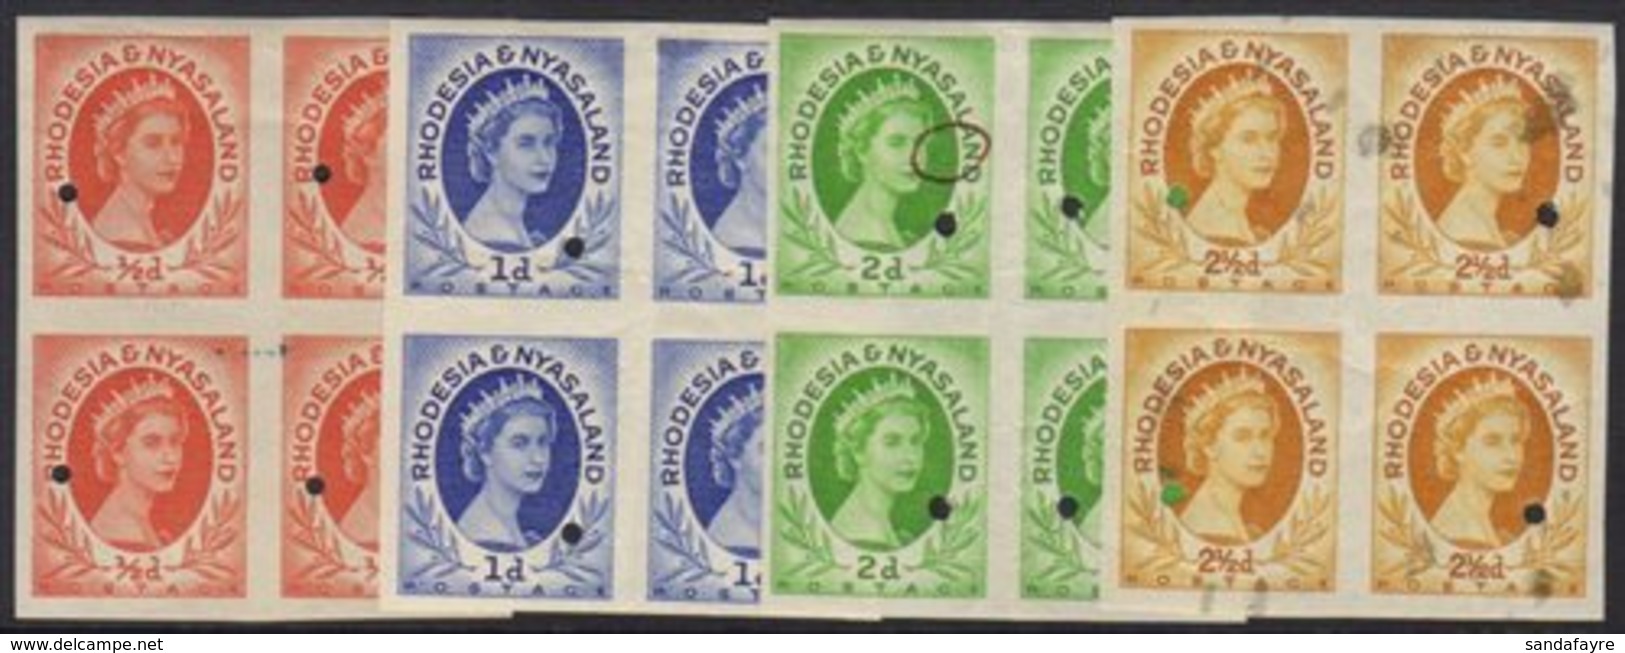 1954-56  Imperf Plate Proof Blocks Of Four ½d, 1d, 2d And 2½d, Mint Or Never Hinged Mint, With Archive Security Punch Ho - Rhodesia & Nyasaland (1954-1963)